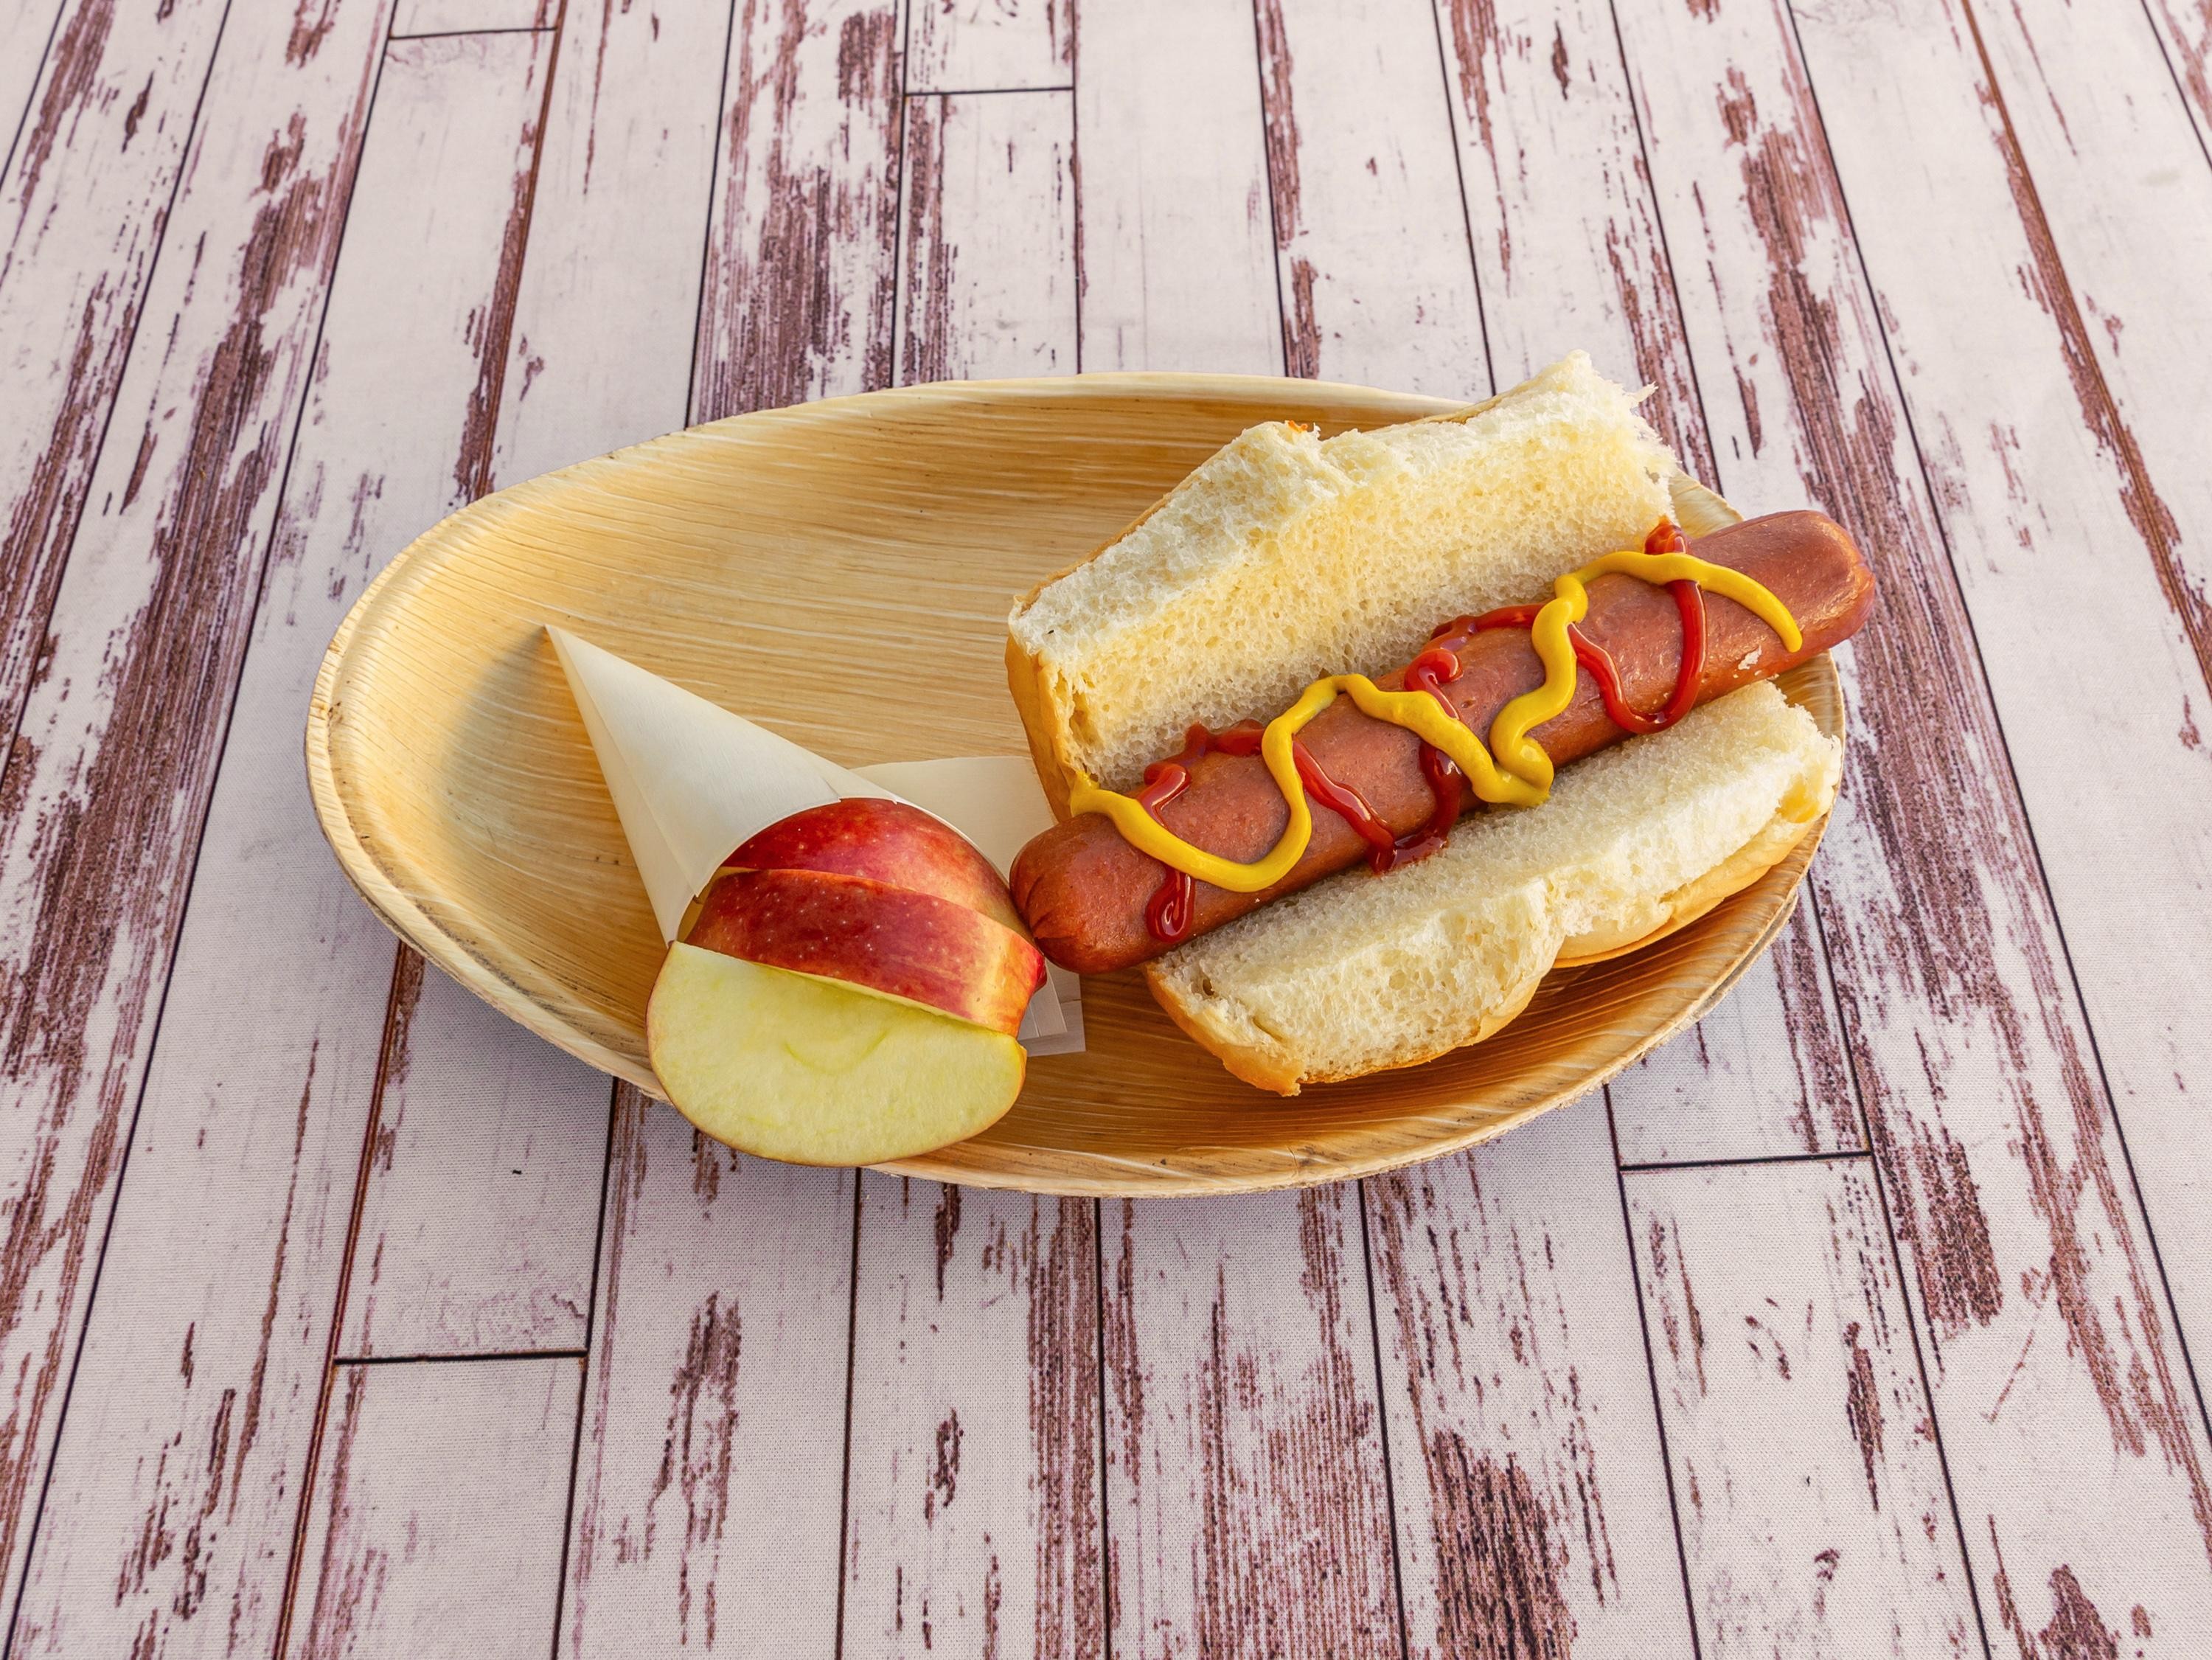 All Beef Hot Dog & Fruit